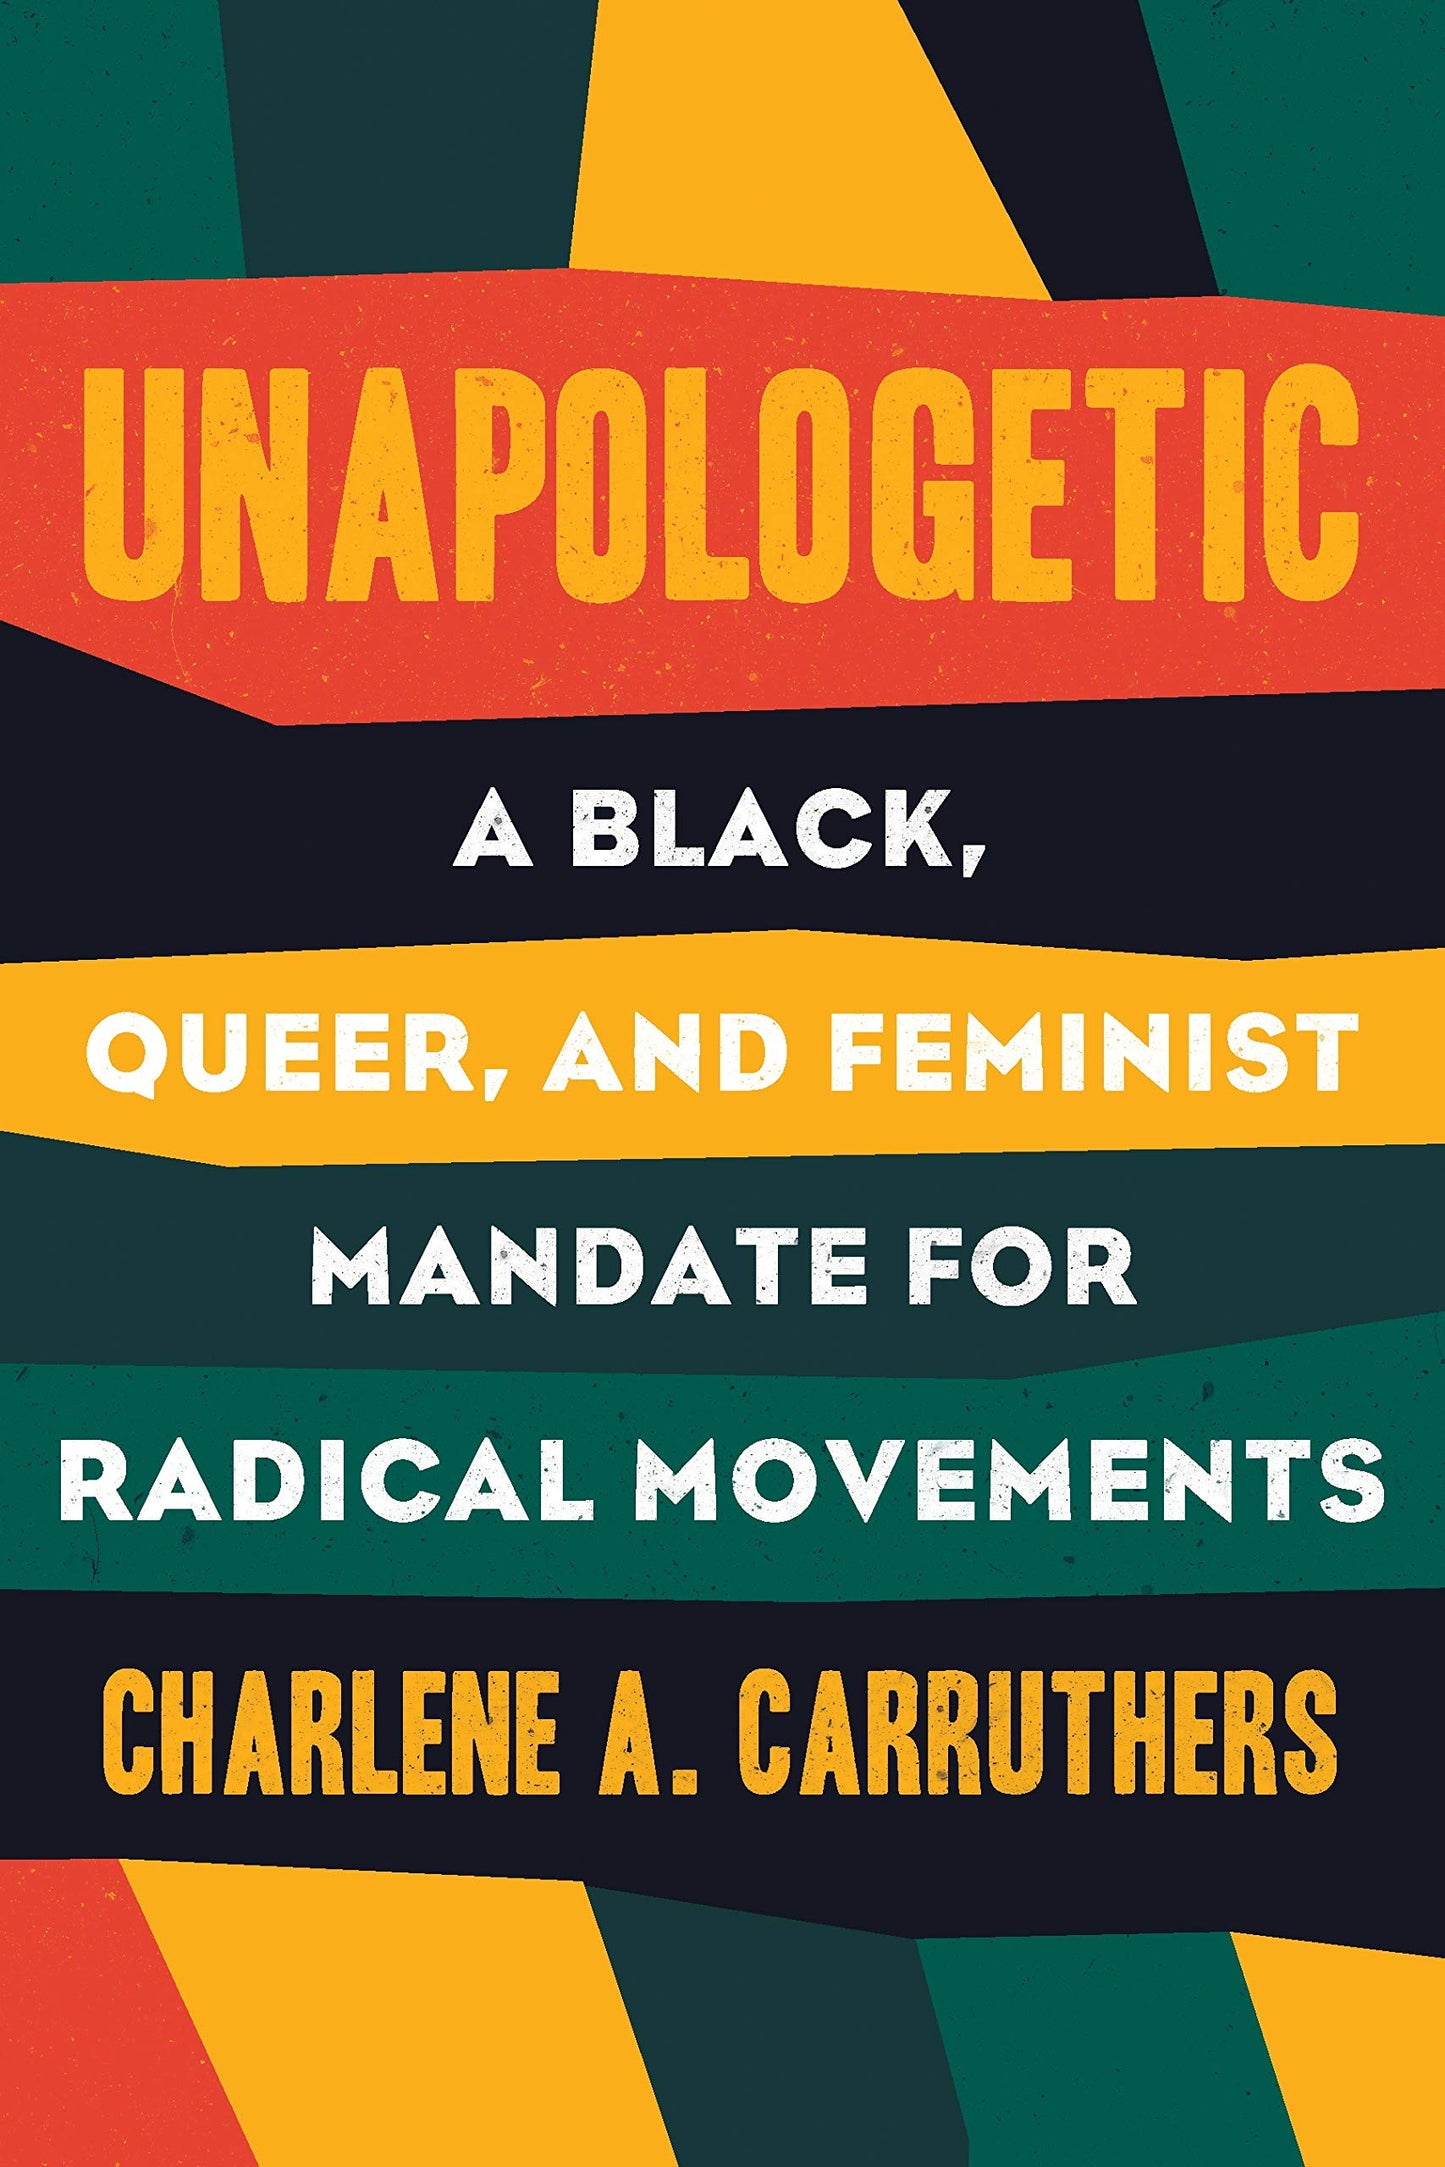 Unapologetic // A Black, Queer, and Feminist Mandate for Radical Movements